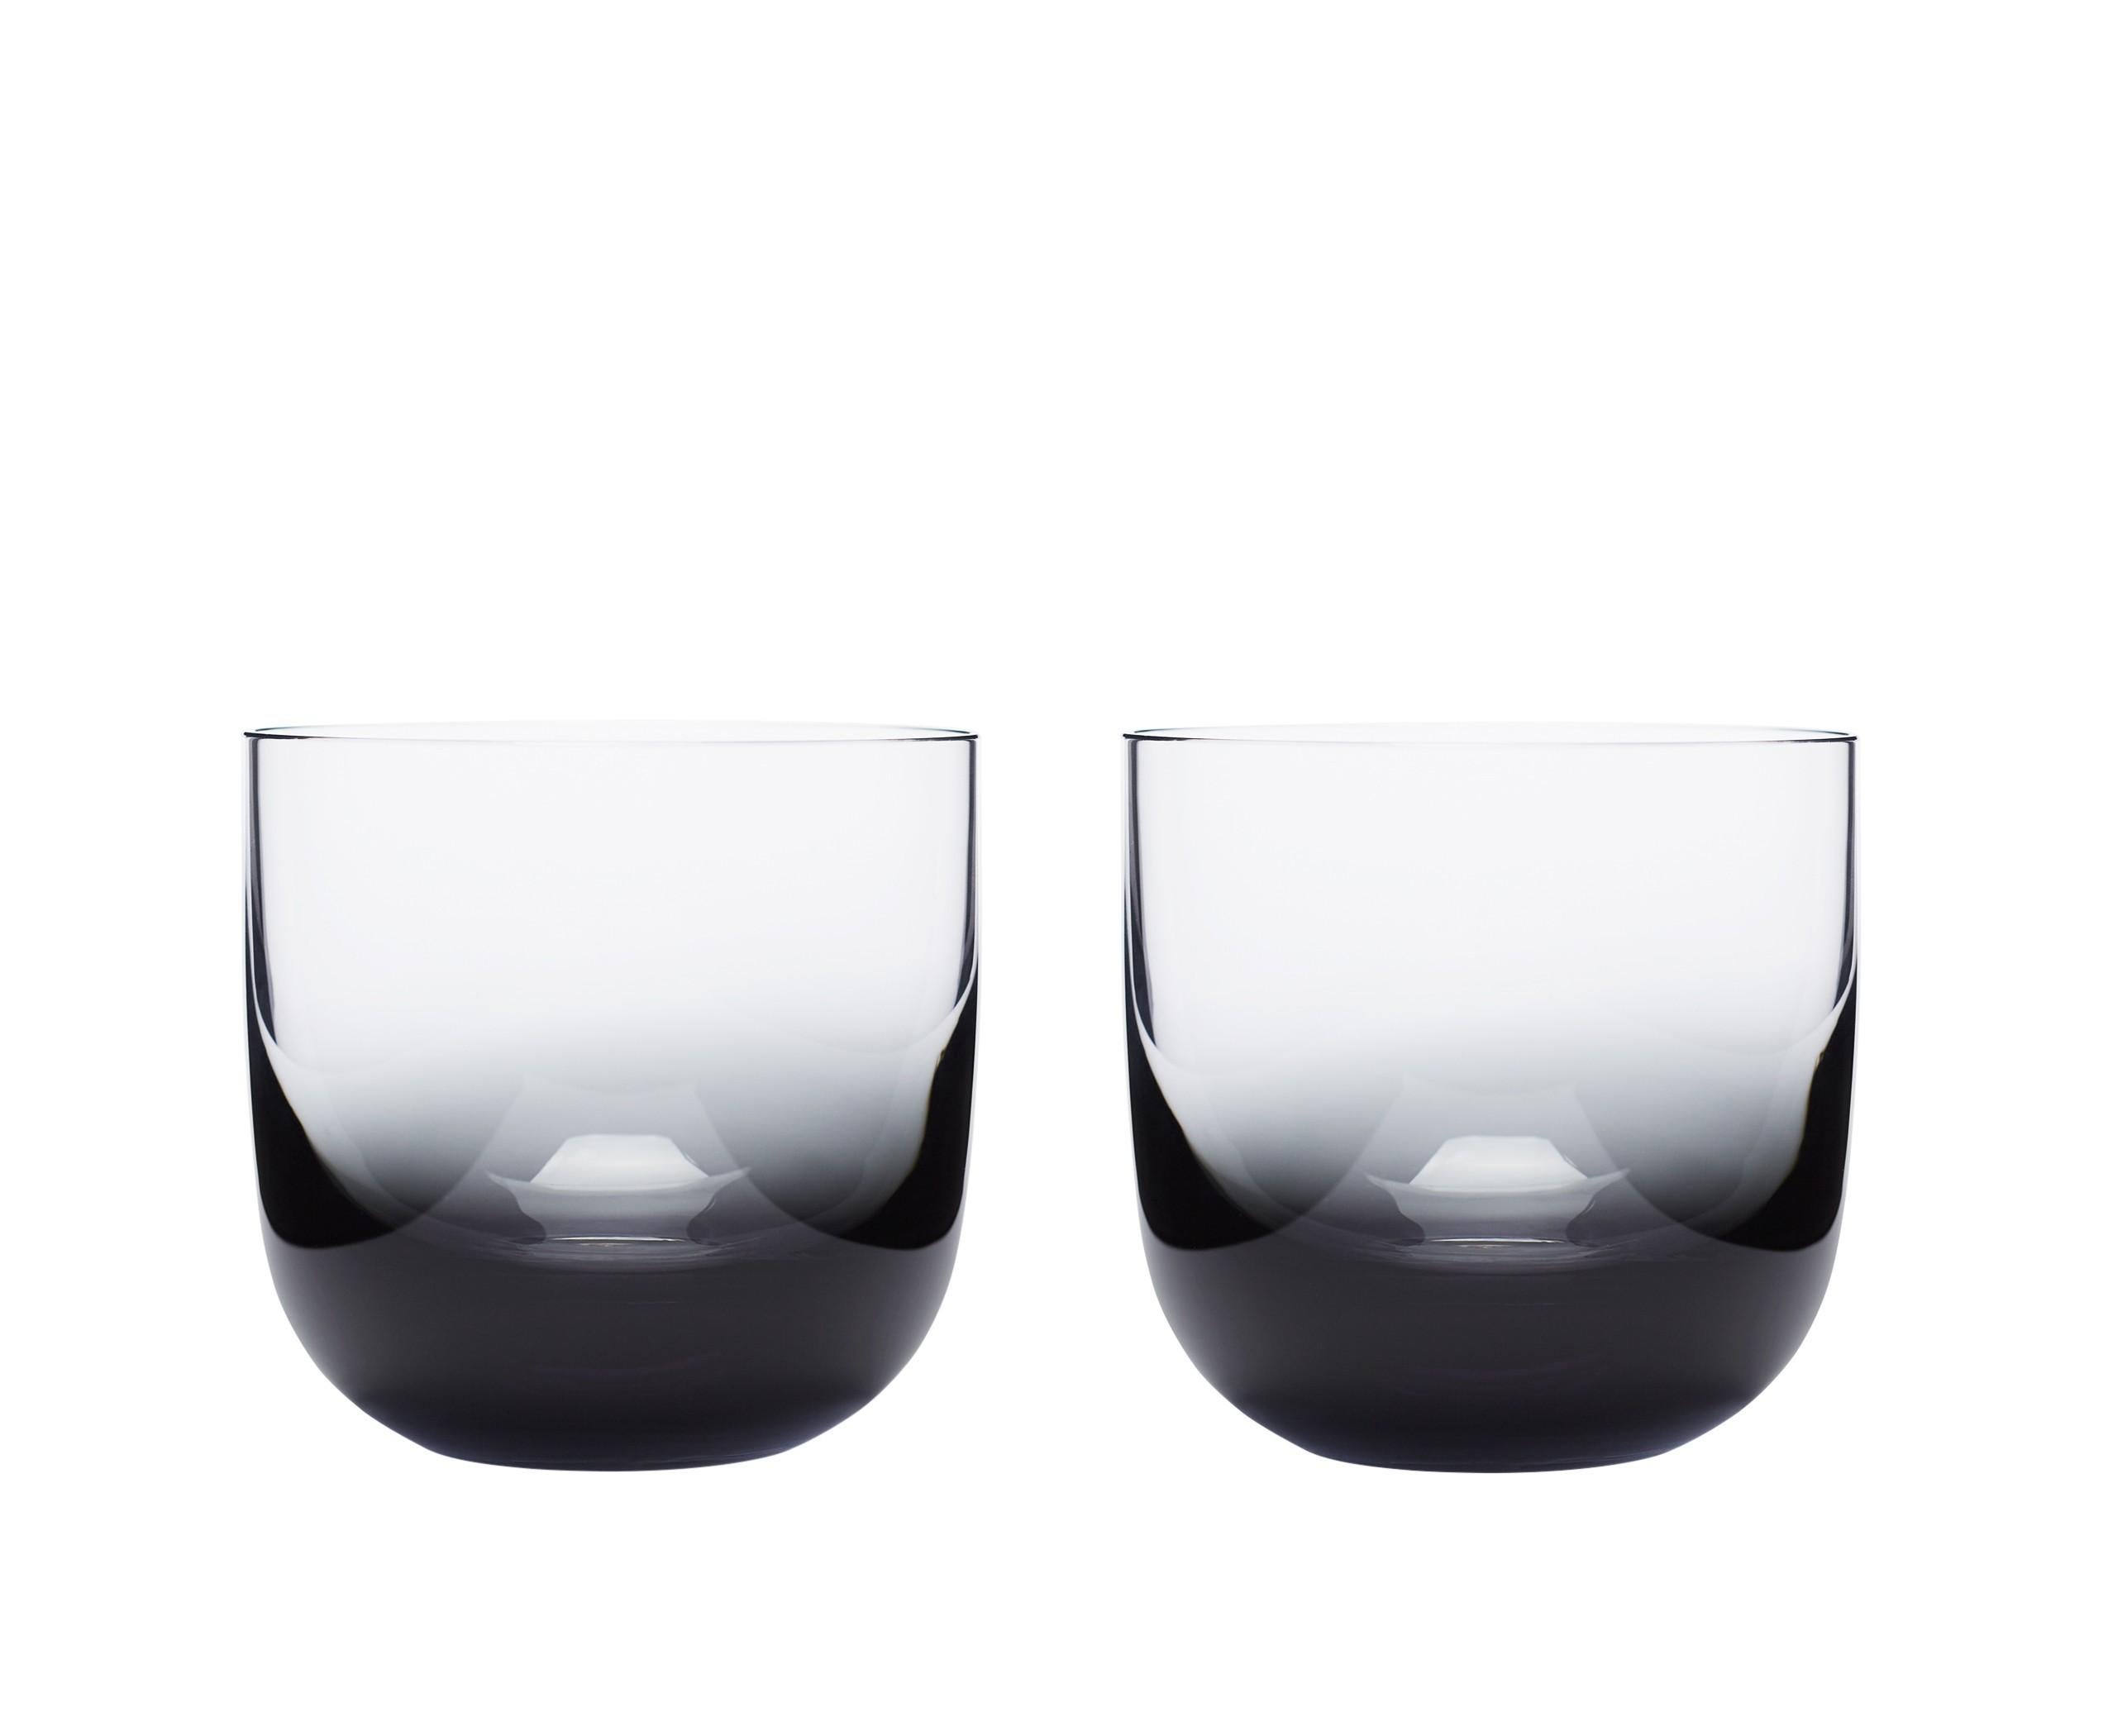 In black, tank sets a mysterious and indulgent tone to our glassware collection. Created through a technically demanding fusion of clear and solid black glass, Tank is mouth-blown into the graphic forms for timeless tabletop architecture.

The